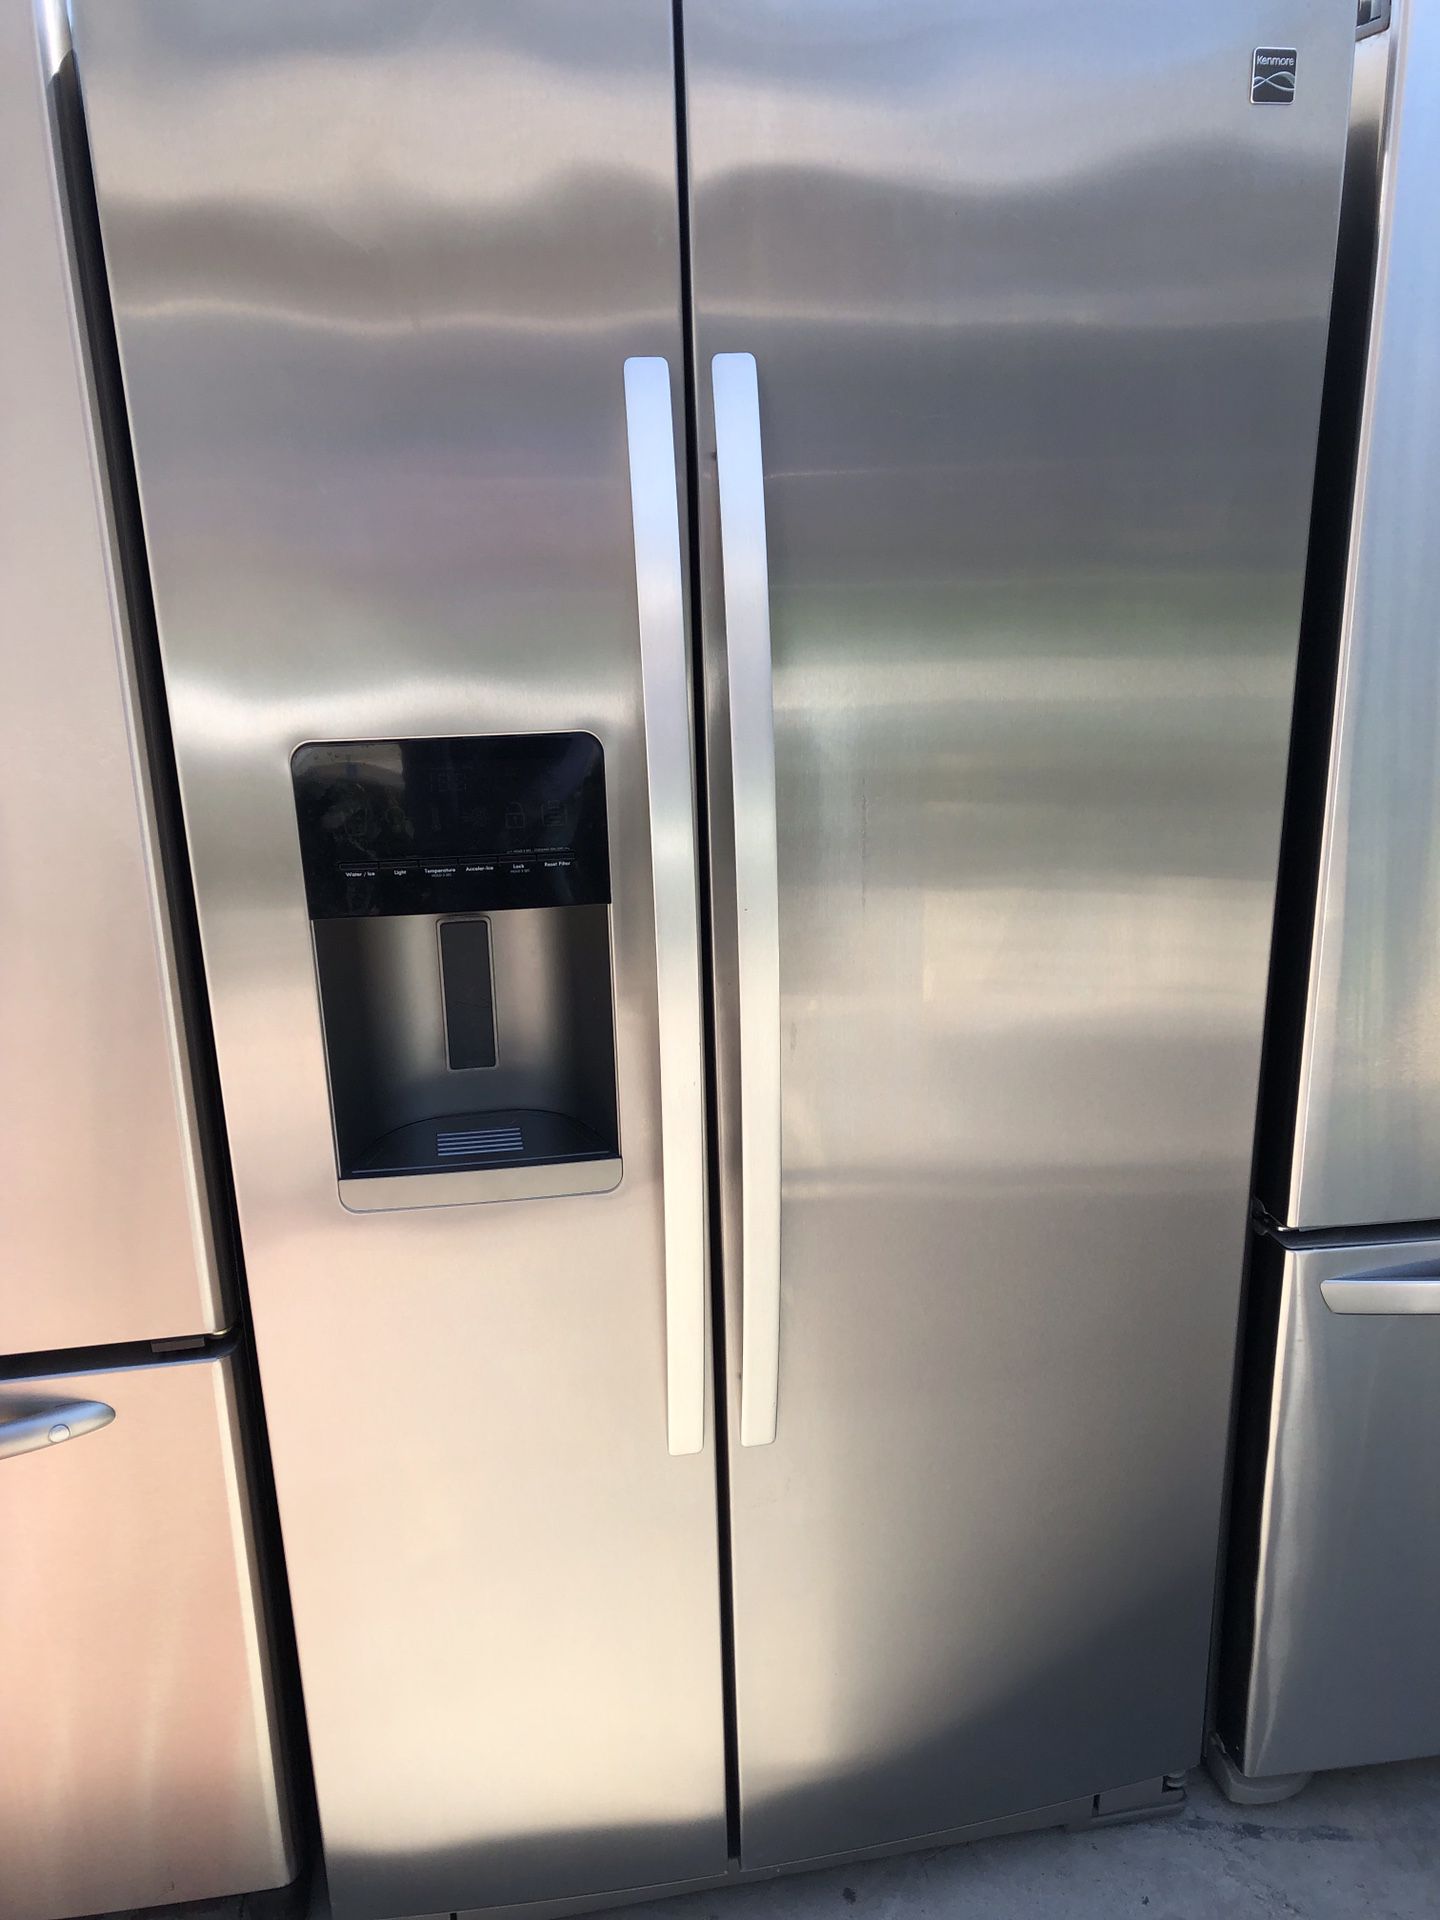 2017 kenmore elite amazing condition works perfect extremely clean